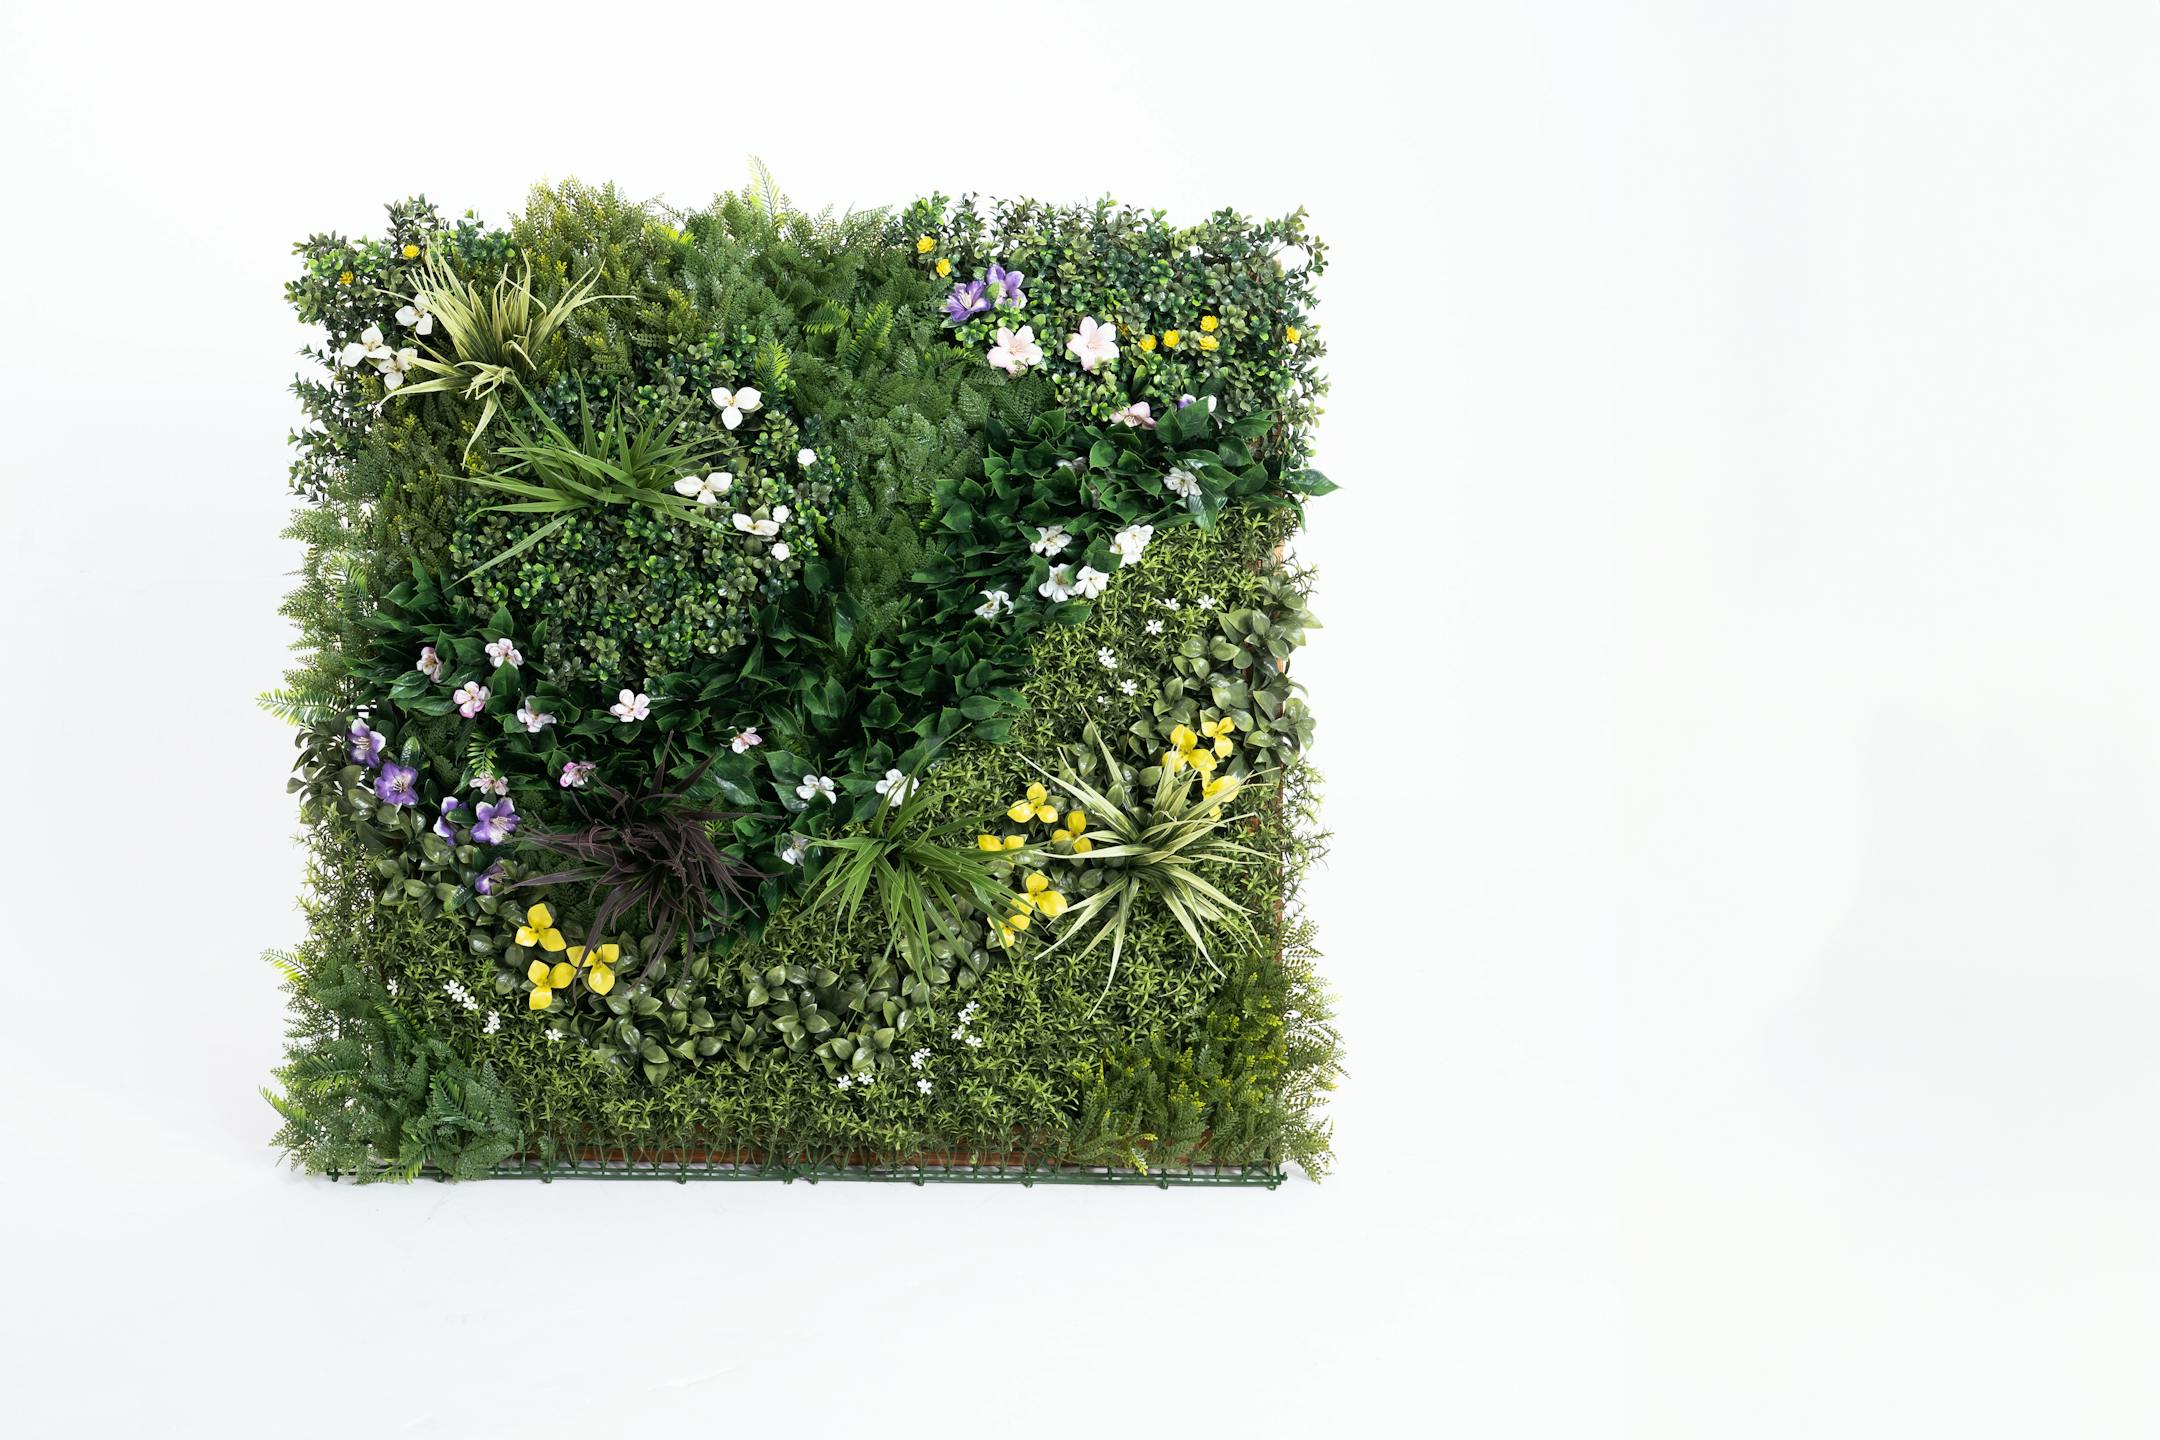 Wildflower style artificial green wall